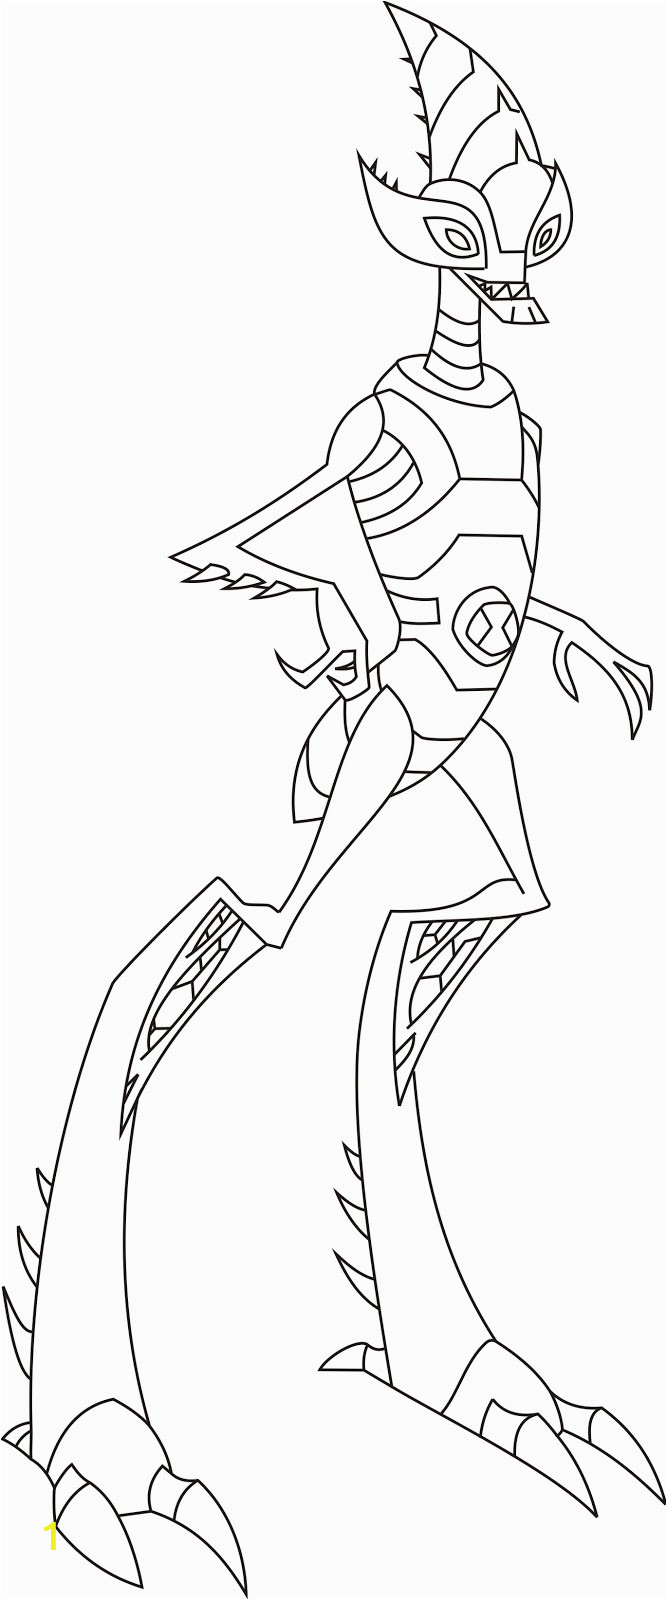 Ben 10 Omniverse Aliens Coloring Pages Ben 10 Omniverse Crash Hopper Free Colouring Pages